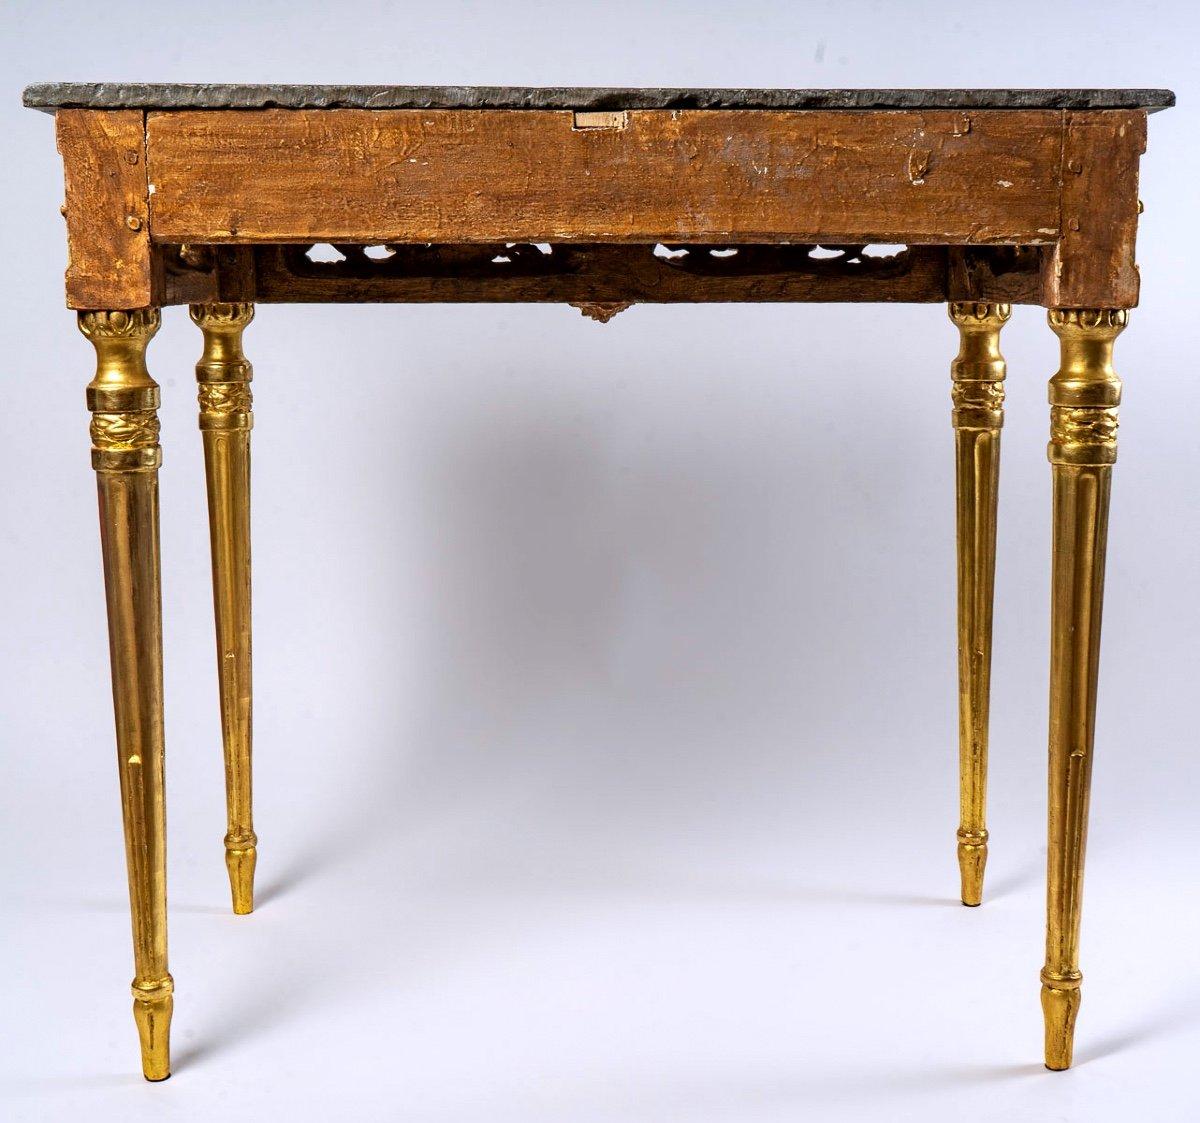 European Gilded Wooden Console Table, 18 Century